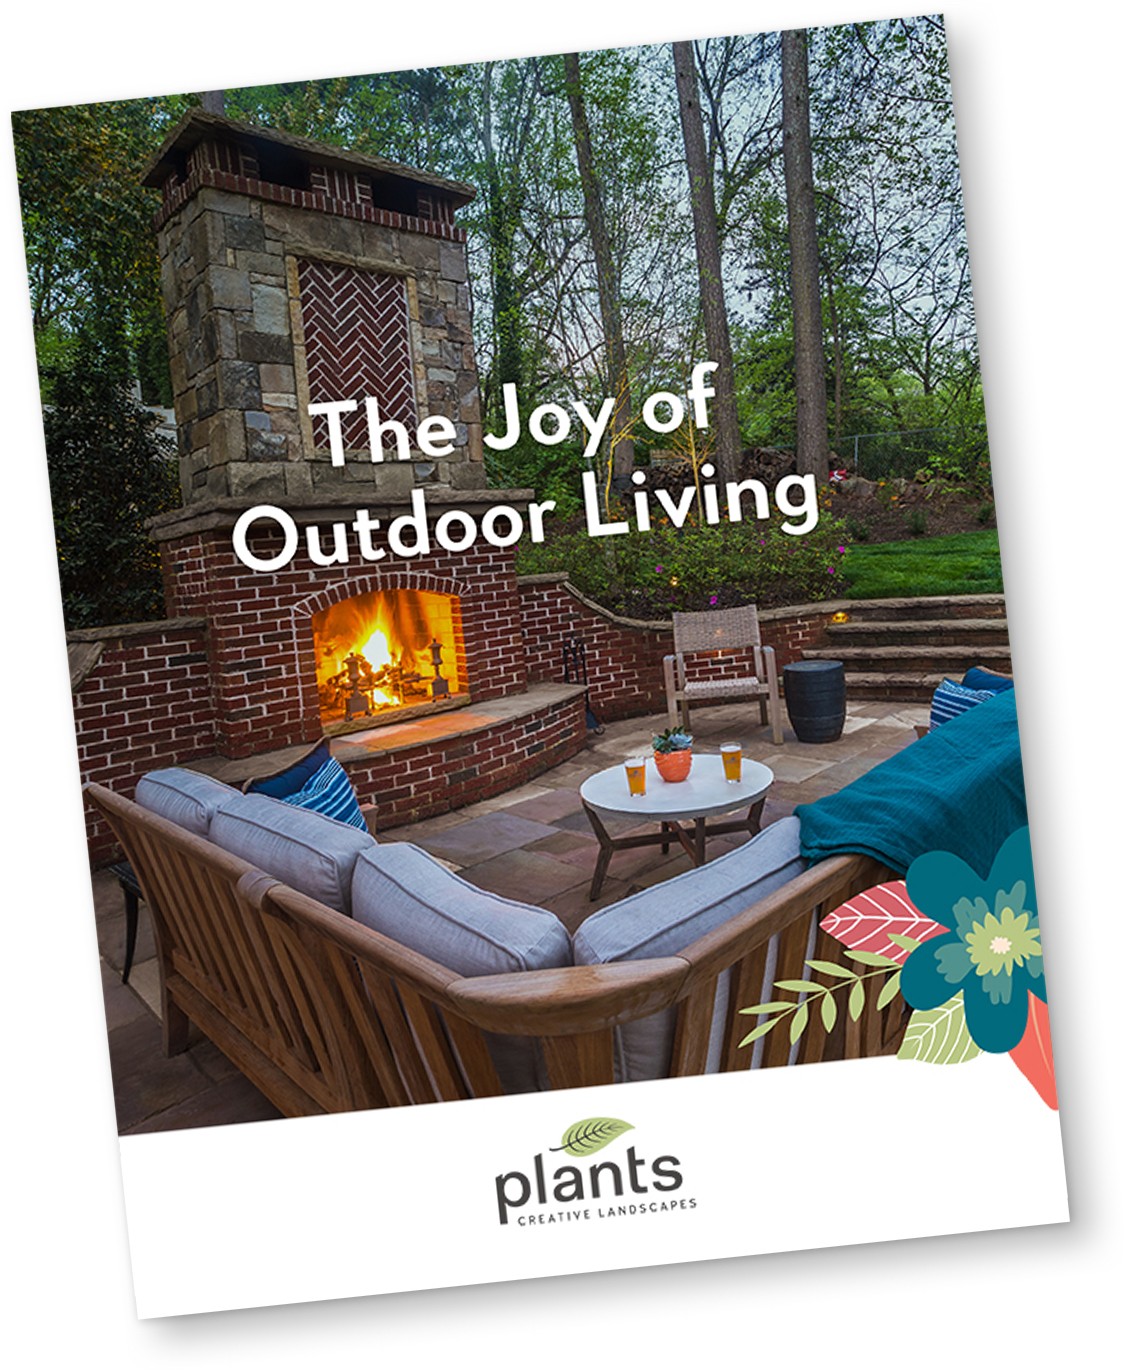 The Joy of Outdoor Living pdf cover